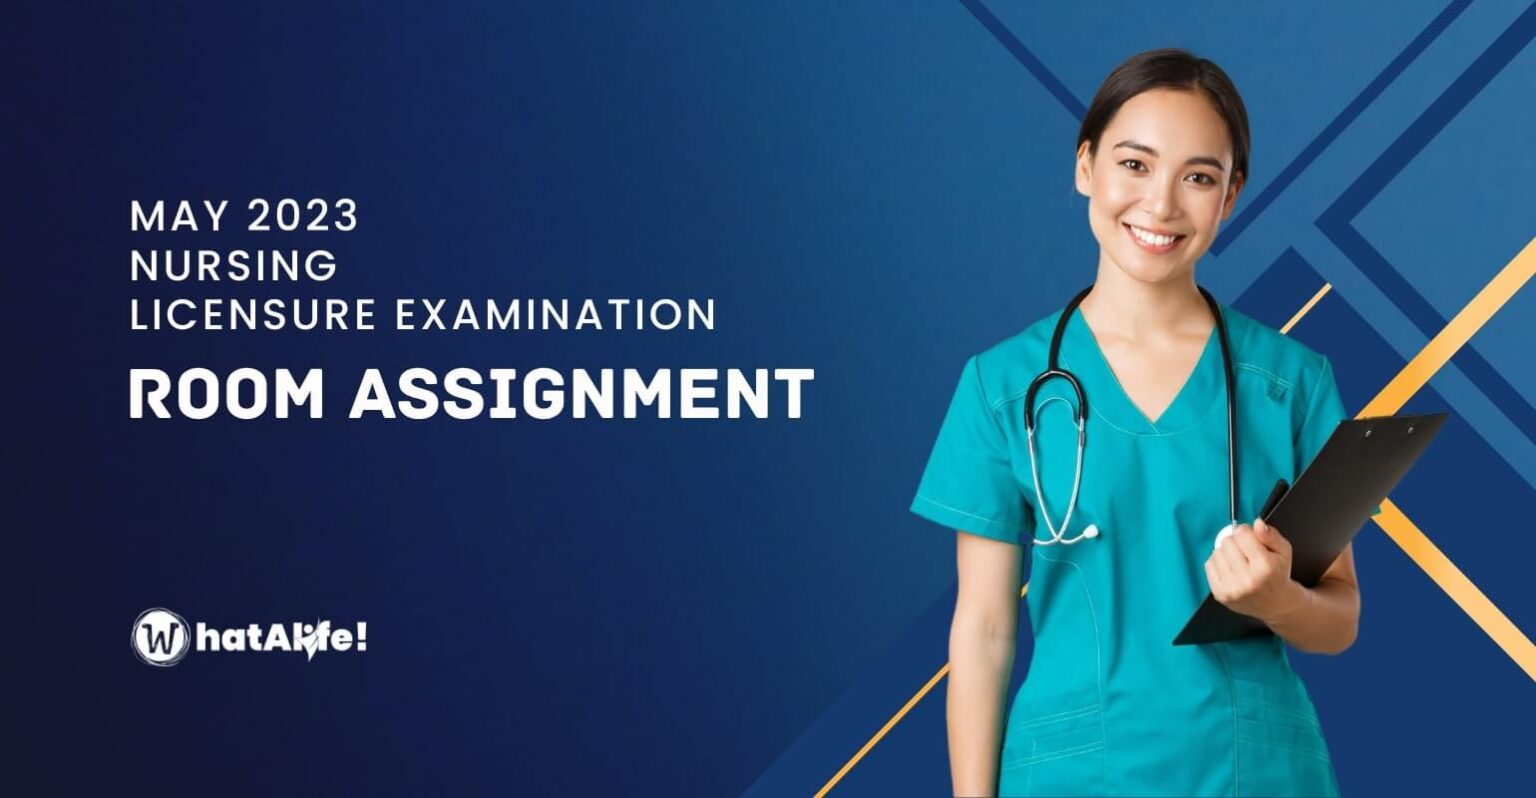 prc room assignment nursing may 2022